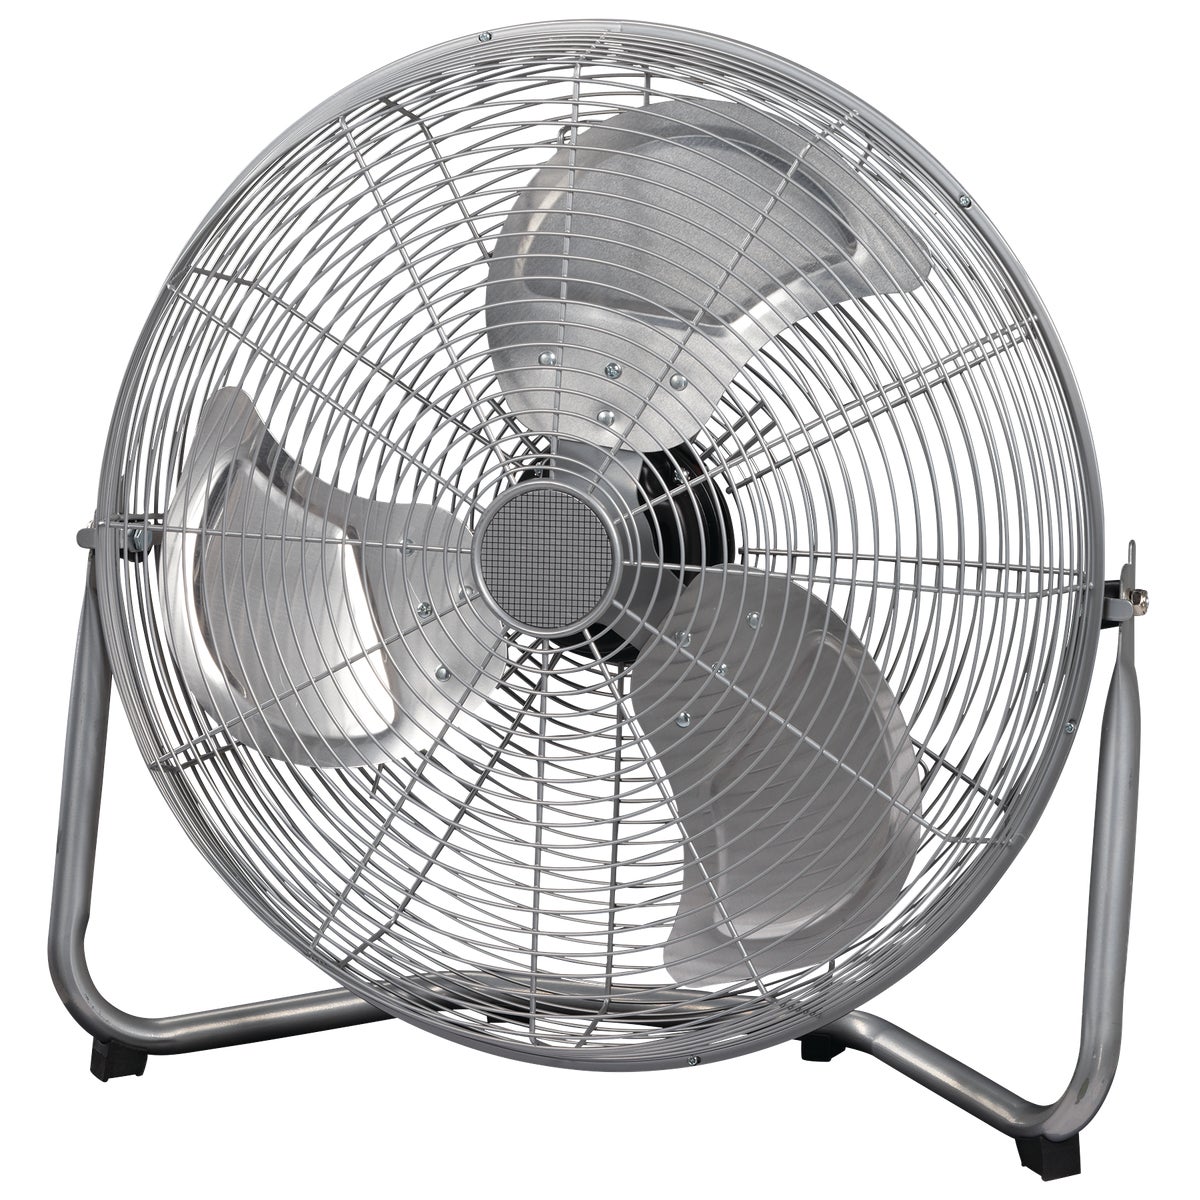 Item 529141, 20-inch industrial grade high-velocity air circulator with 3-speed comfort 